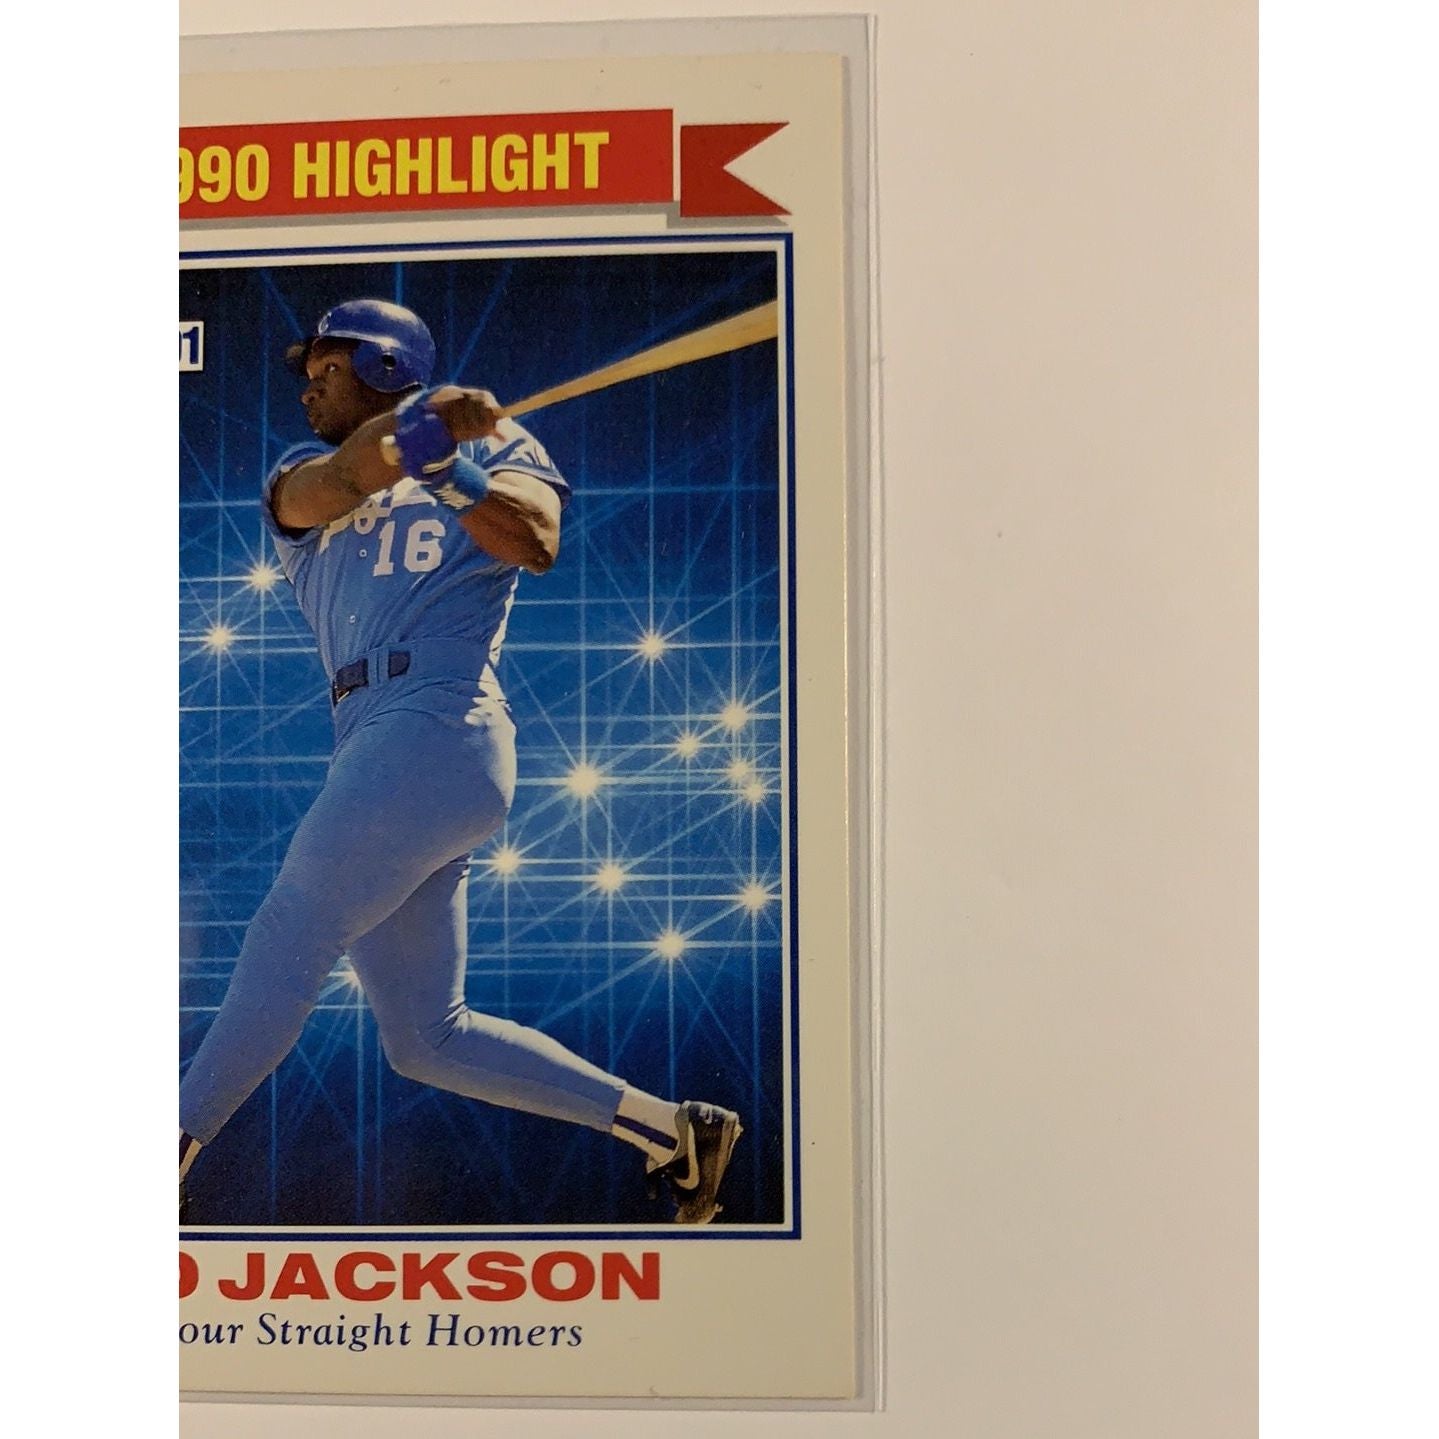  1991 Score Bo Jackson Four Straight Homers Highlight Card  Local Legends Cards & Collectibles